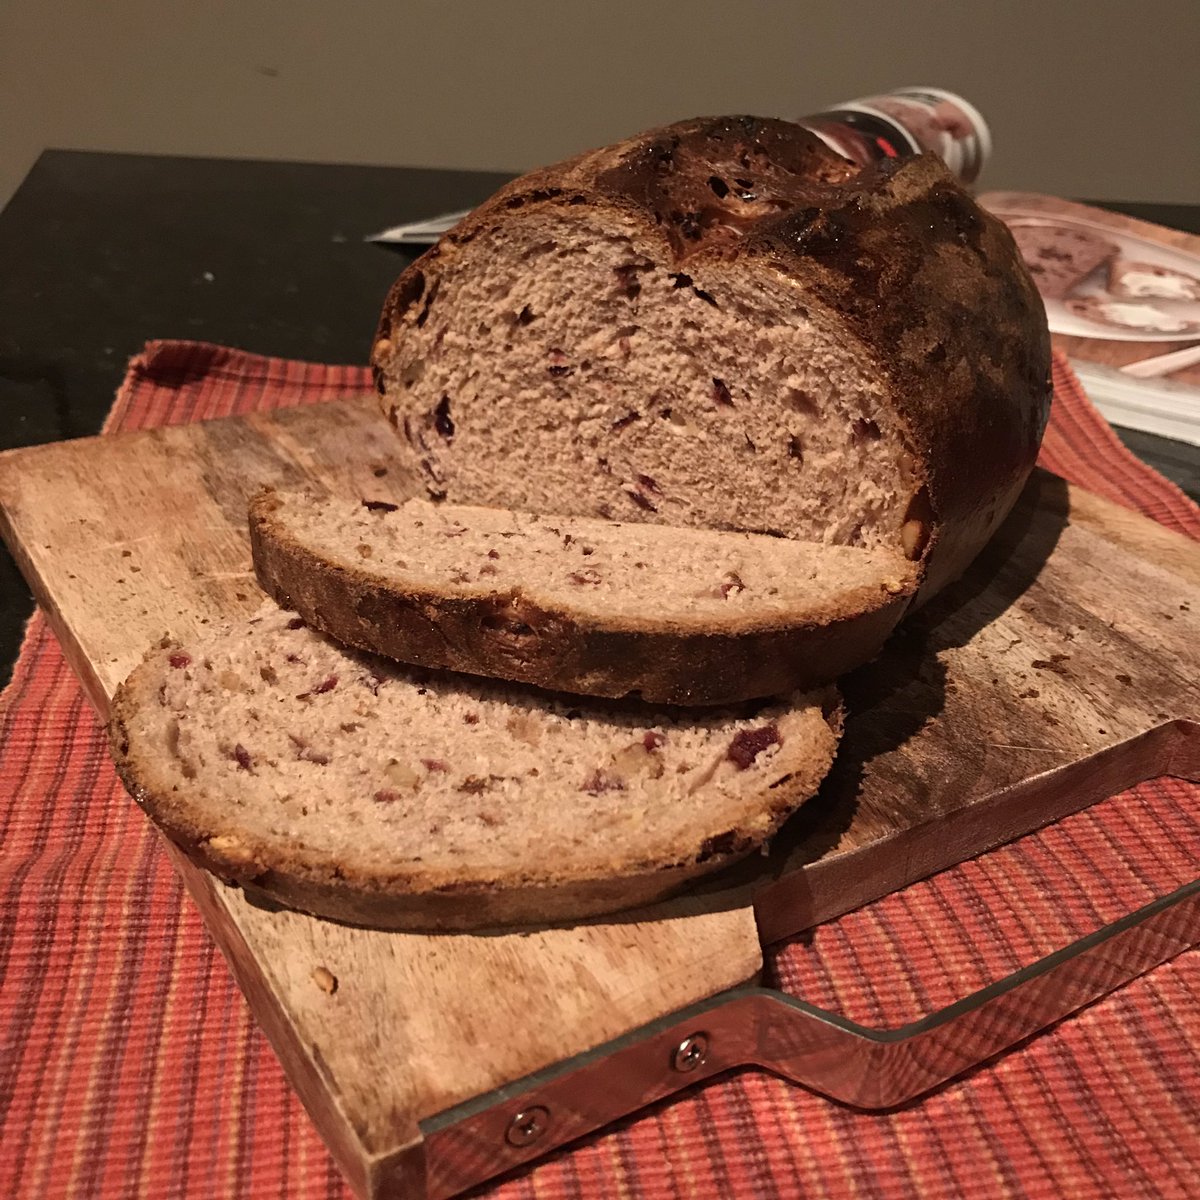 Bread #21: Cranberry-Walnut Bread. I made this bread two weeks ago but I’ve been so busy  a nicely textured sandwich bread, cool with some brie, and a really pretty and hefty crust. Not an all-time fave bread, but a nice one.